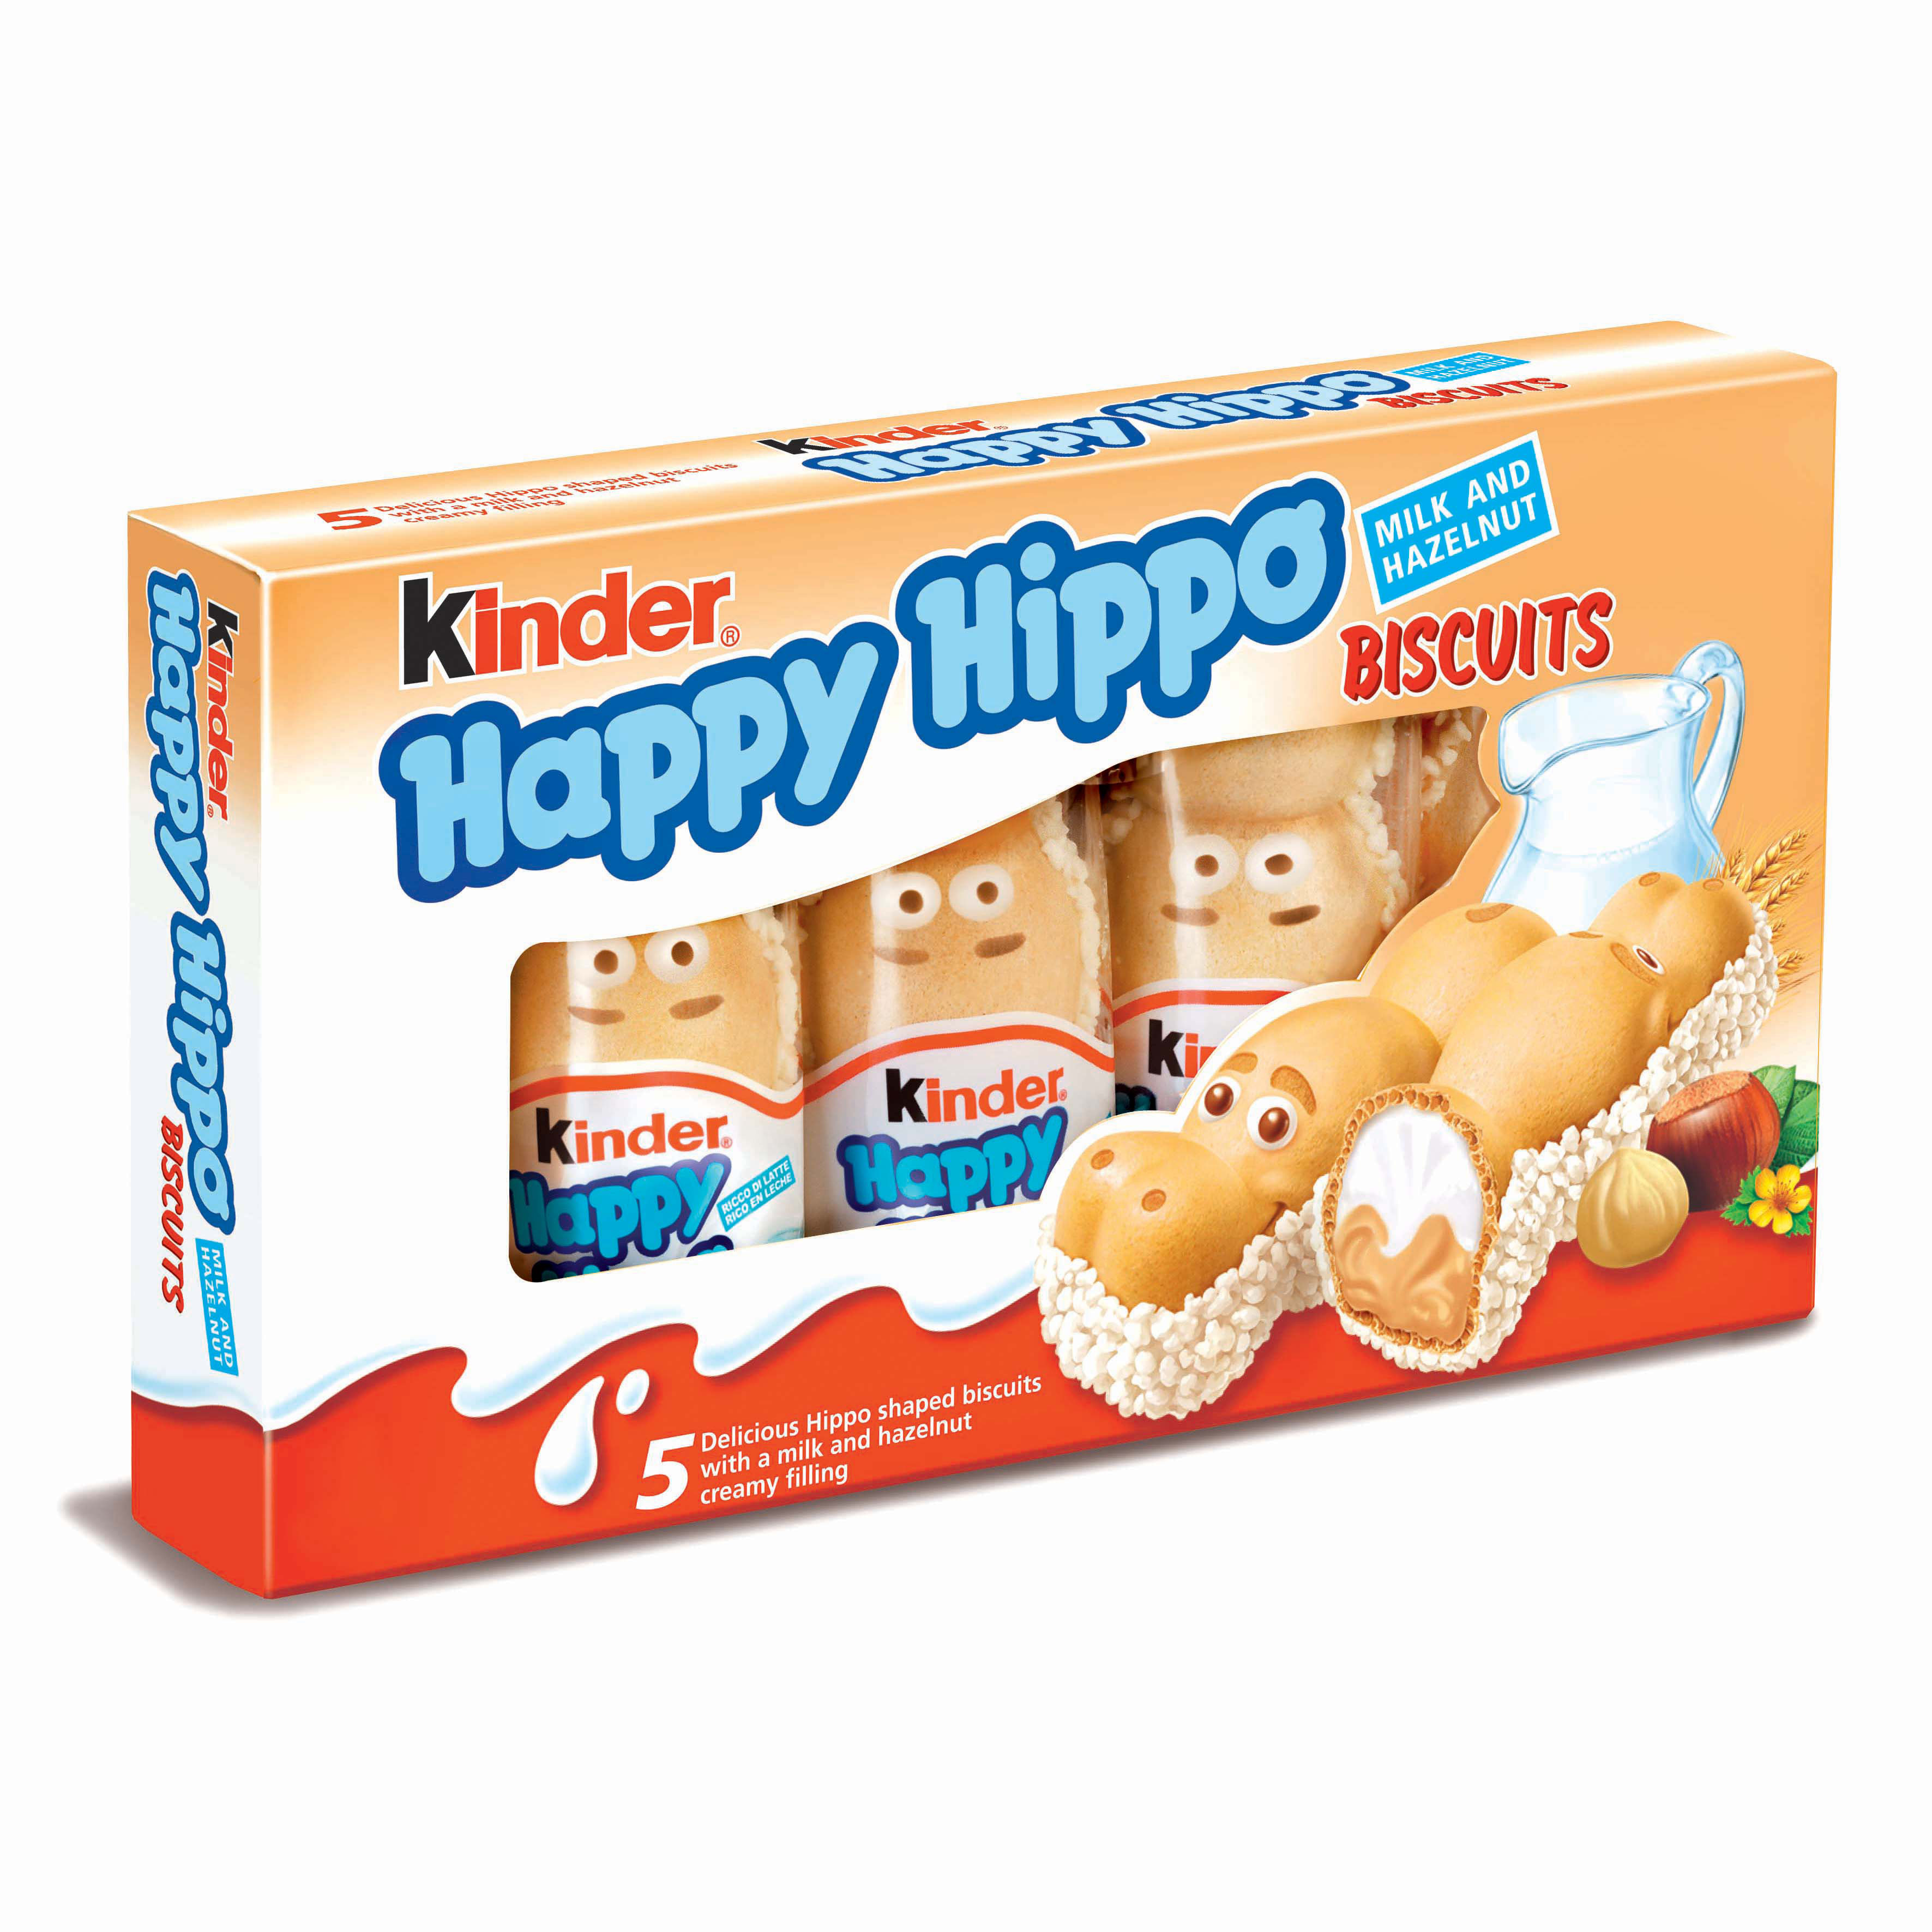 KINDER HAPPY HIPPO 5 PACK